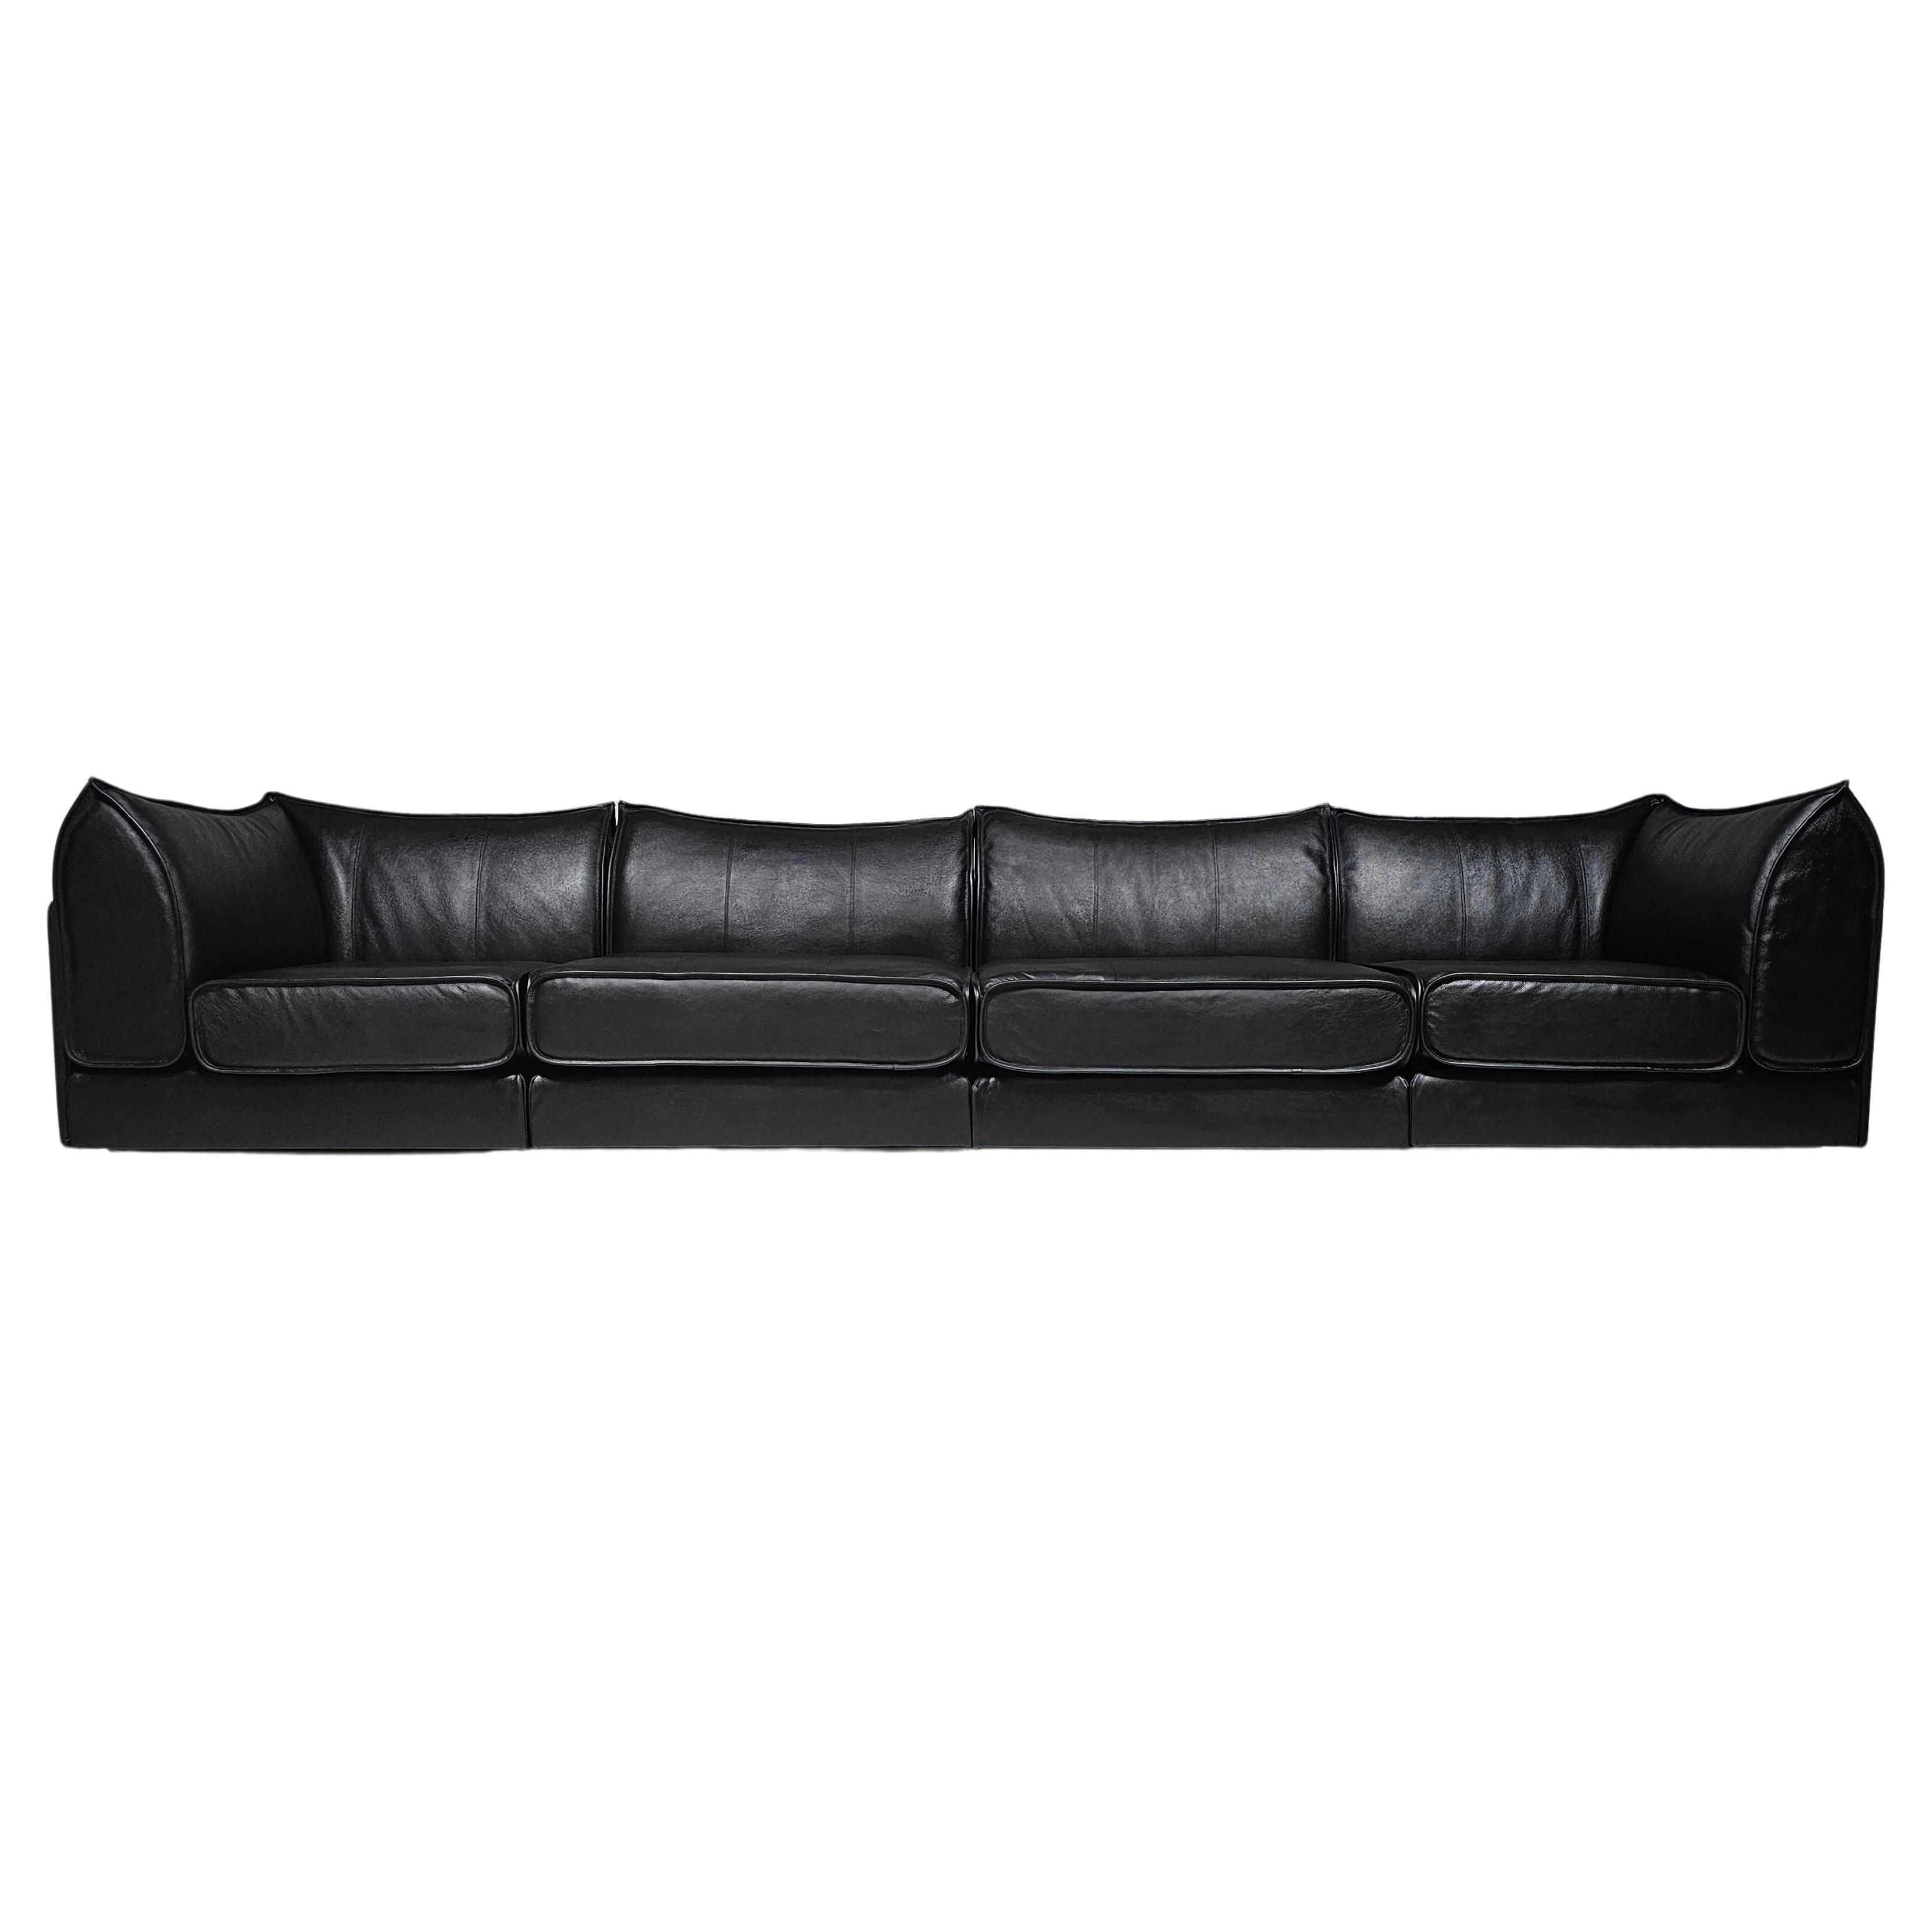 De Sede DS-19 black leather 4-seater 'Pagoda' Sectional Sofa, 1970s For Sale